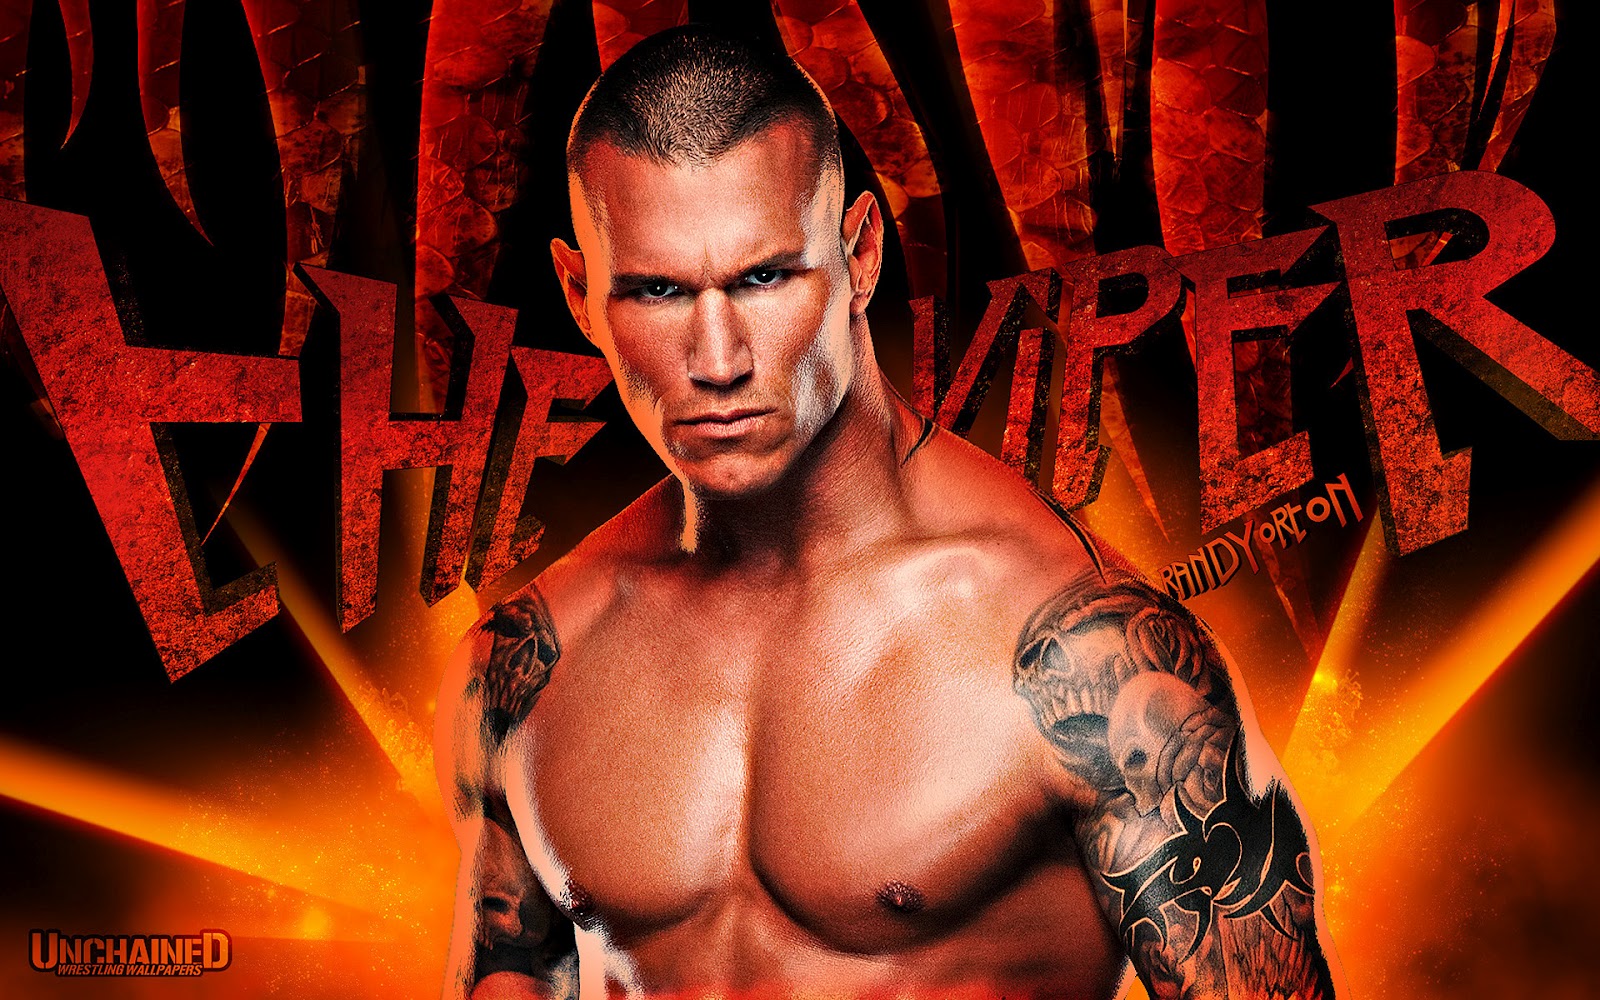 All About Wrestling Stars Randy Orton Wallpaper